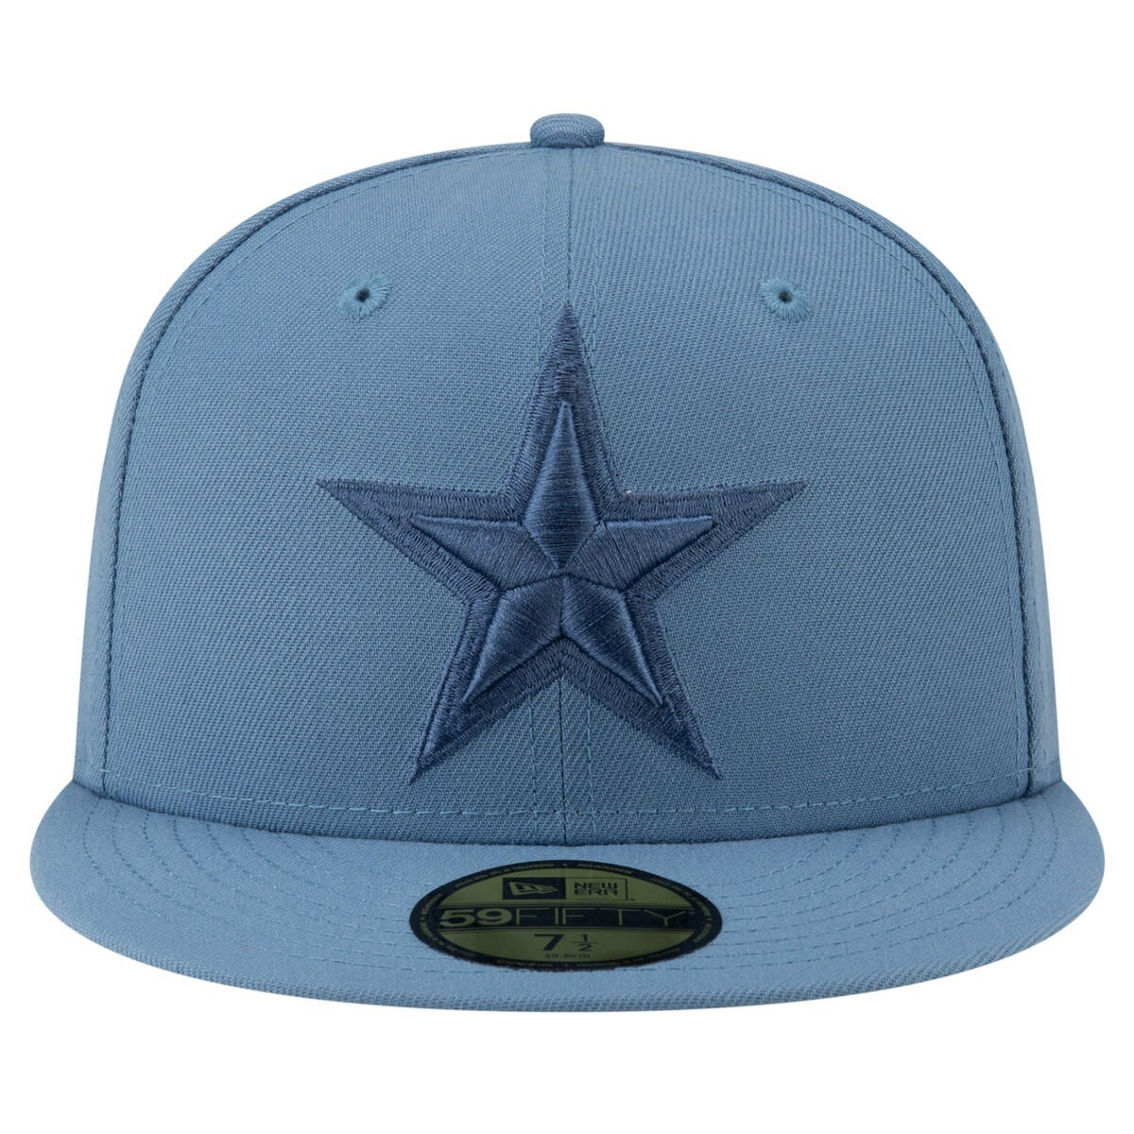 New Era Men's Blue Dallas Cowboys Color Pack 59FIFTY Fitted Hat - Image 3 of 4